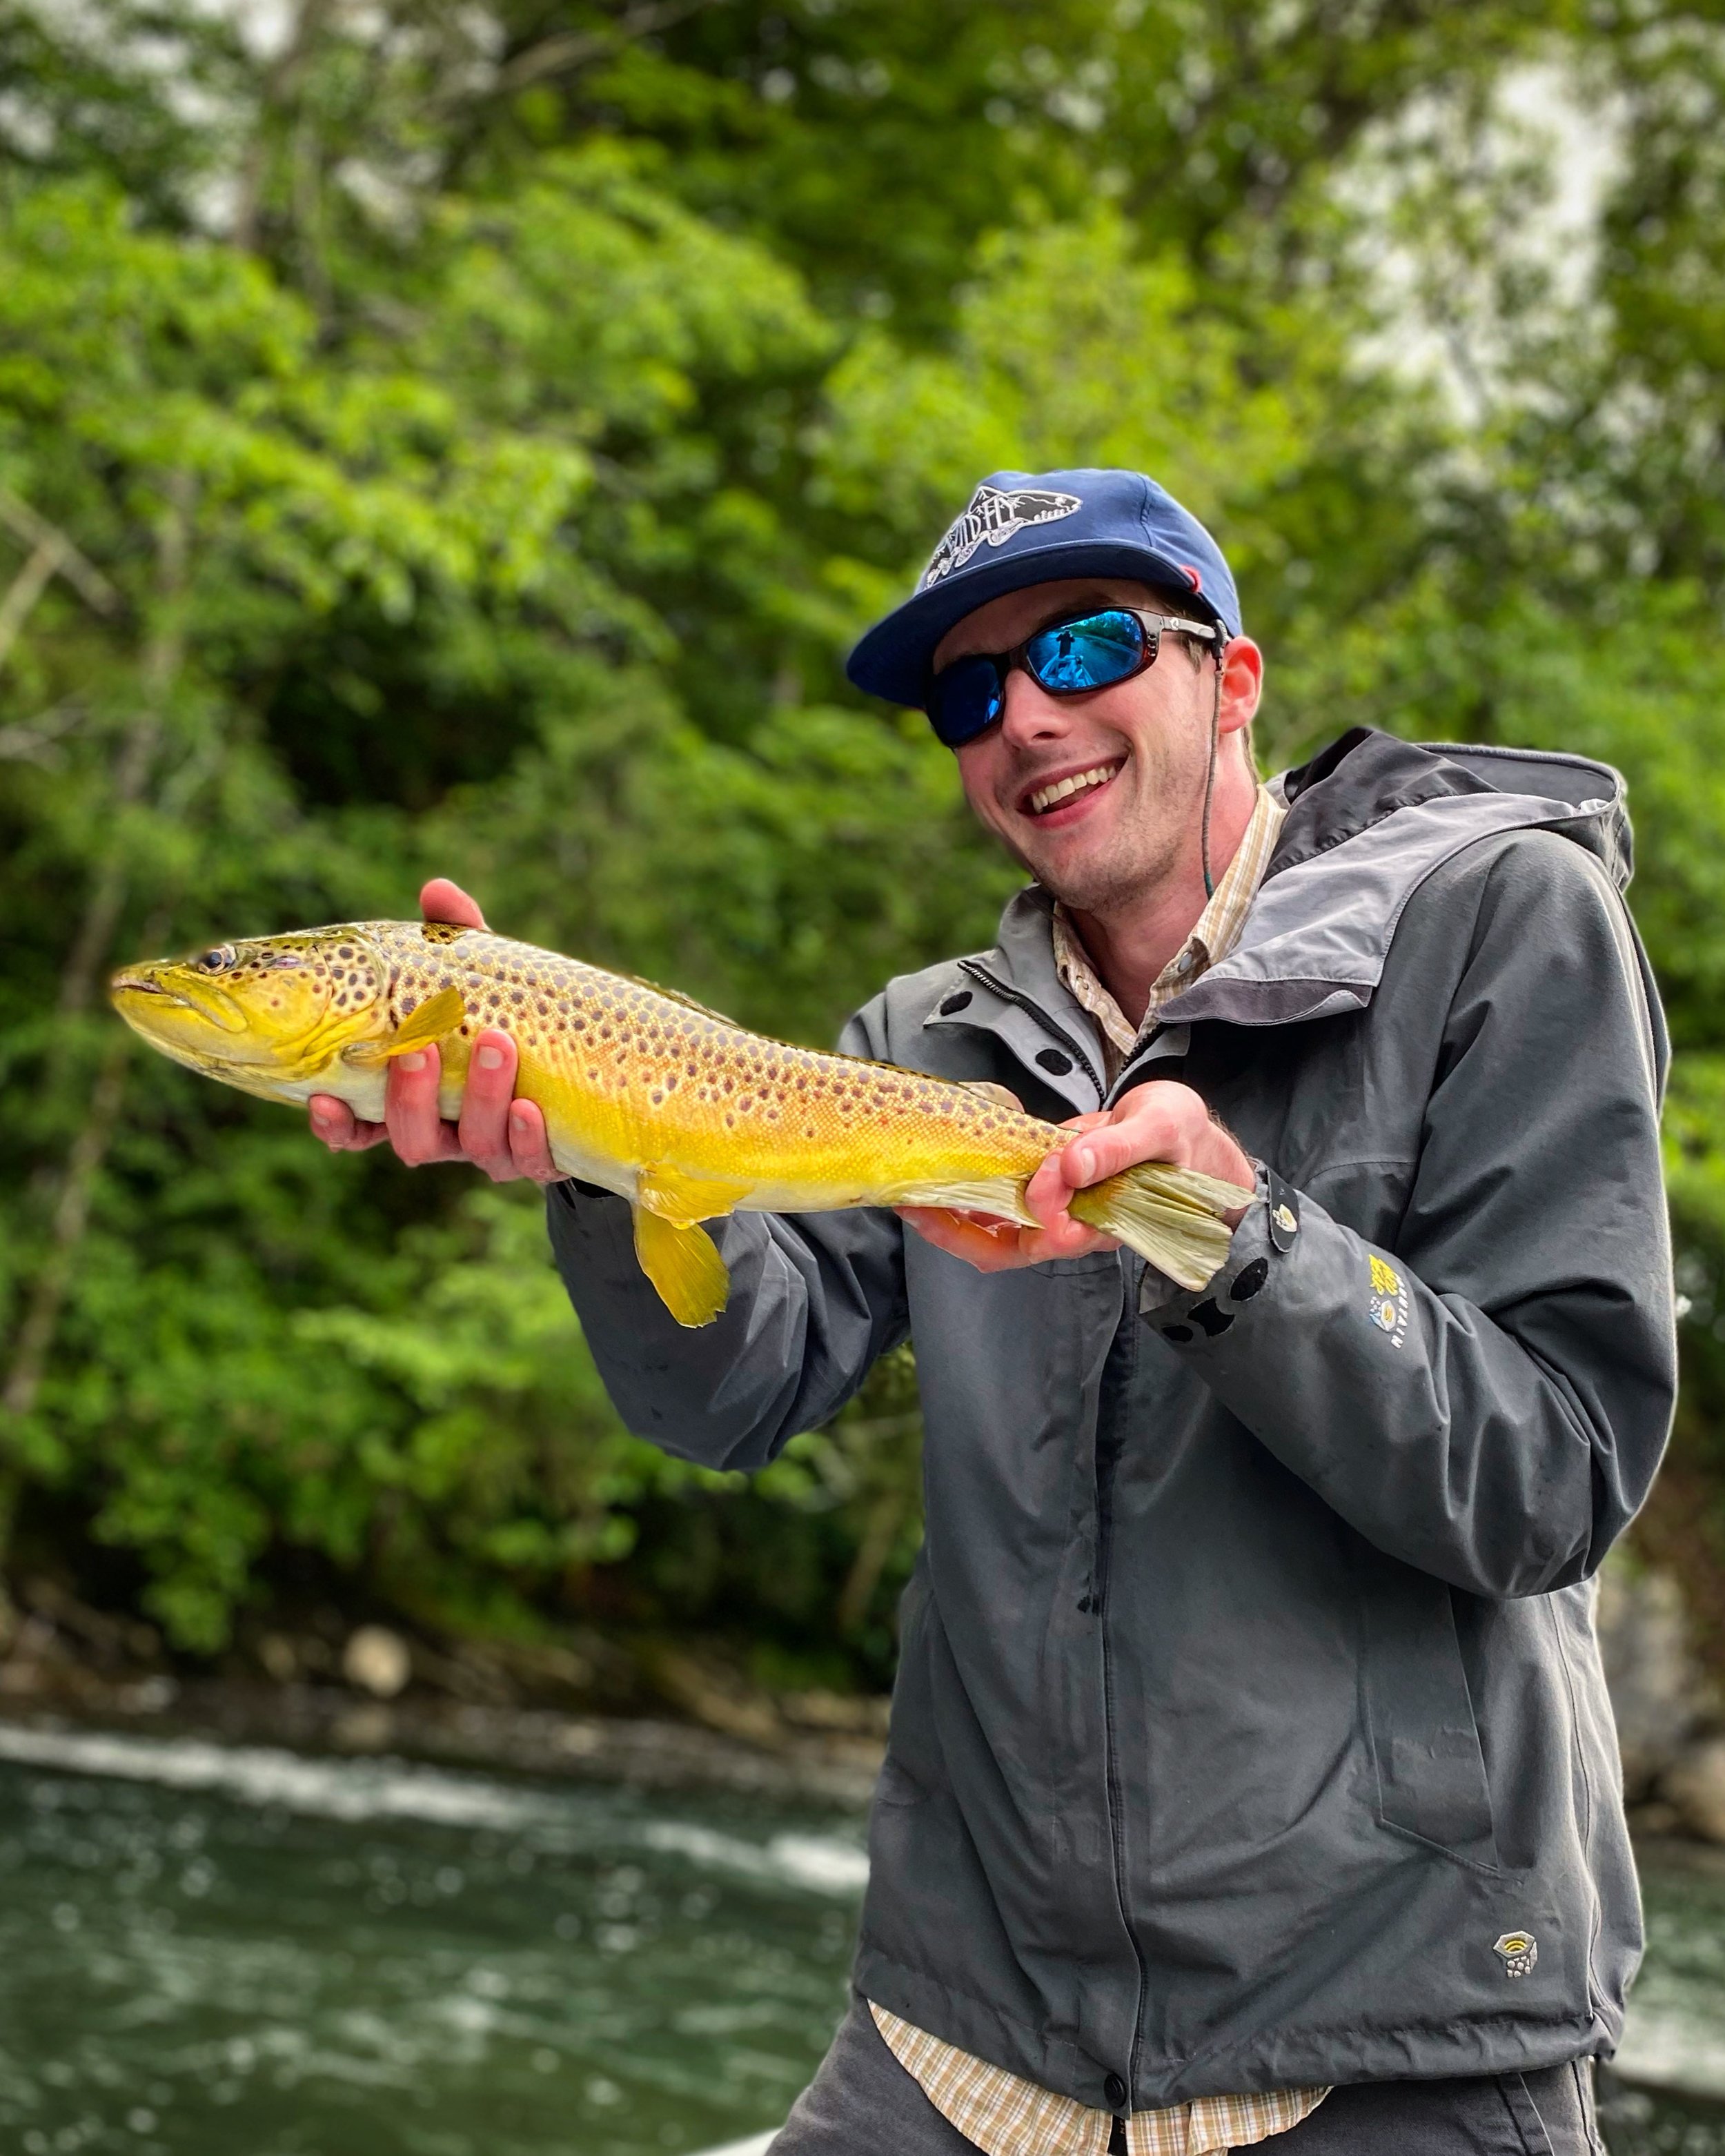 Brady Carter guide service client catches beautiful brown trout